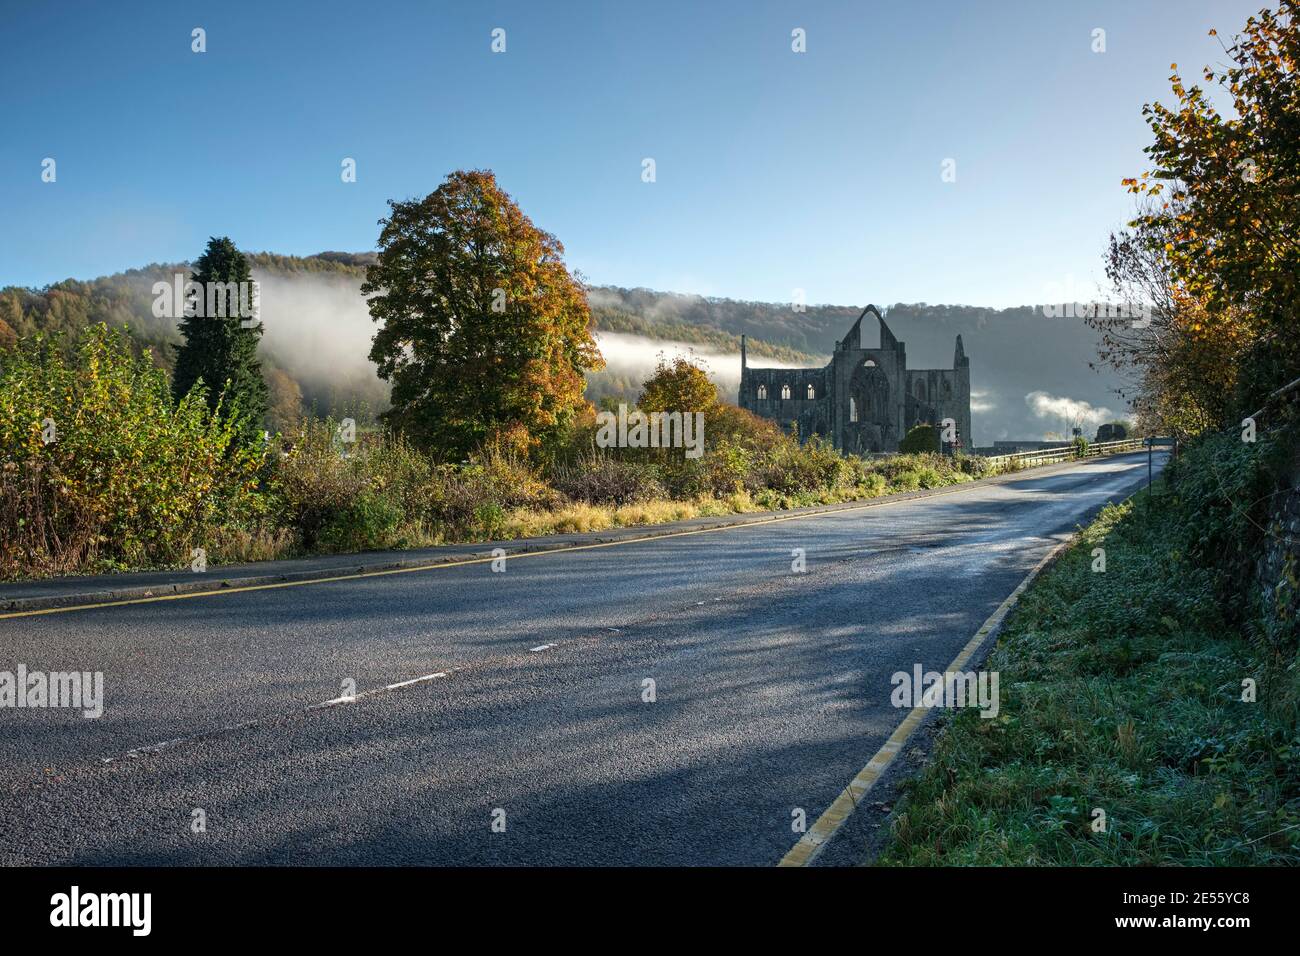 Tintern Abbey next to the A466 Wye valley road. Stock Photo